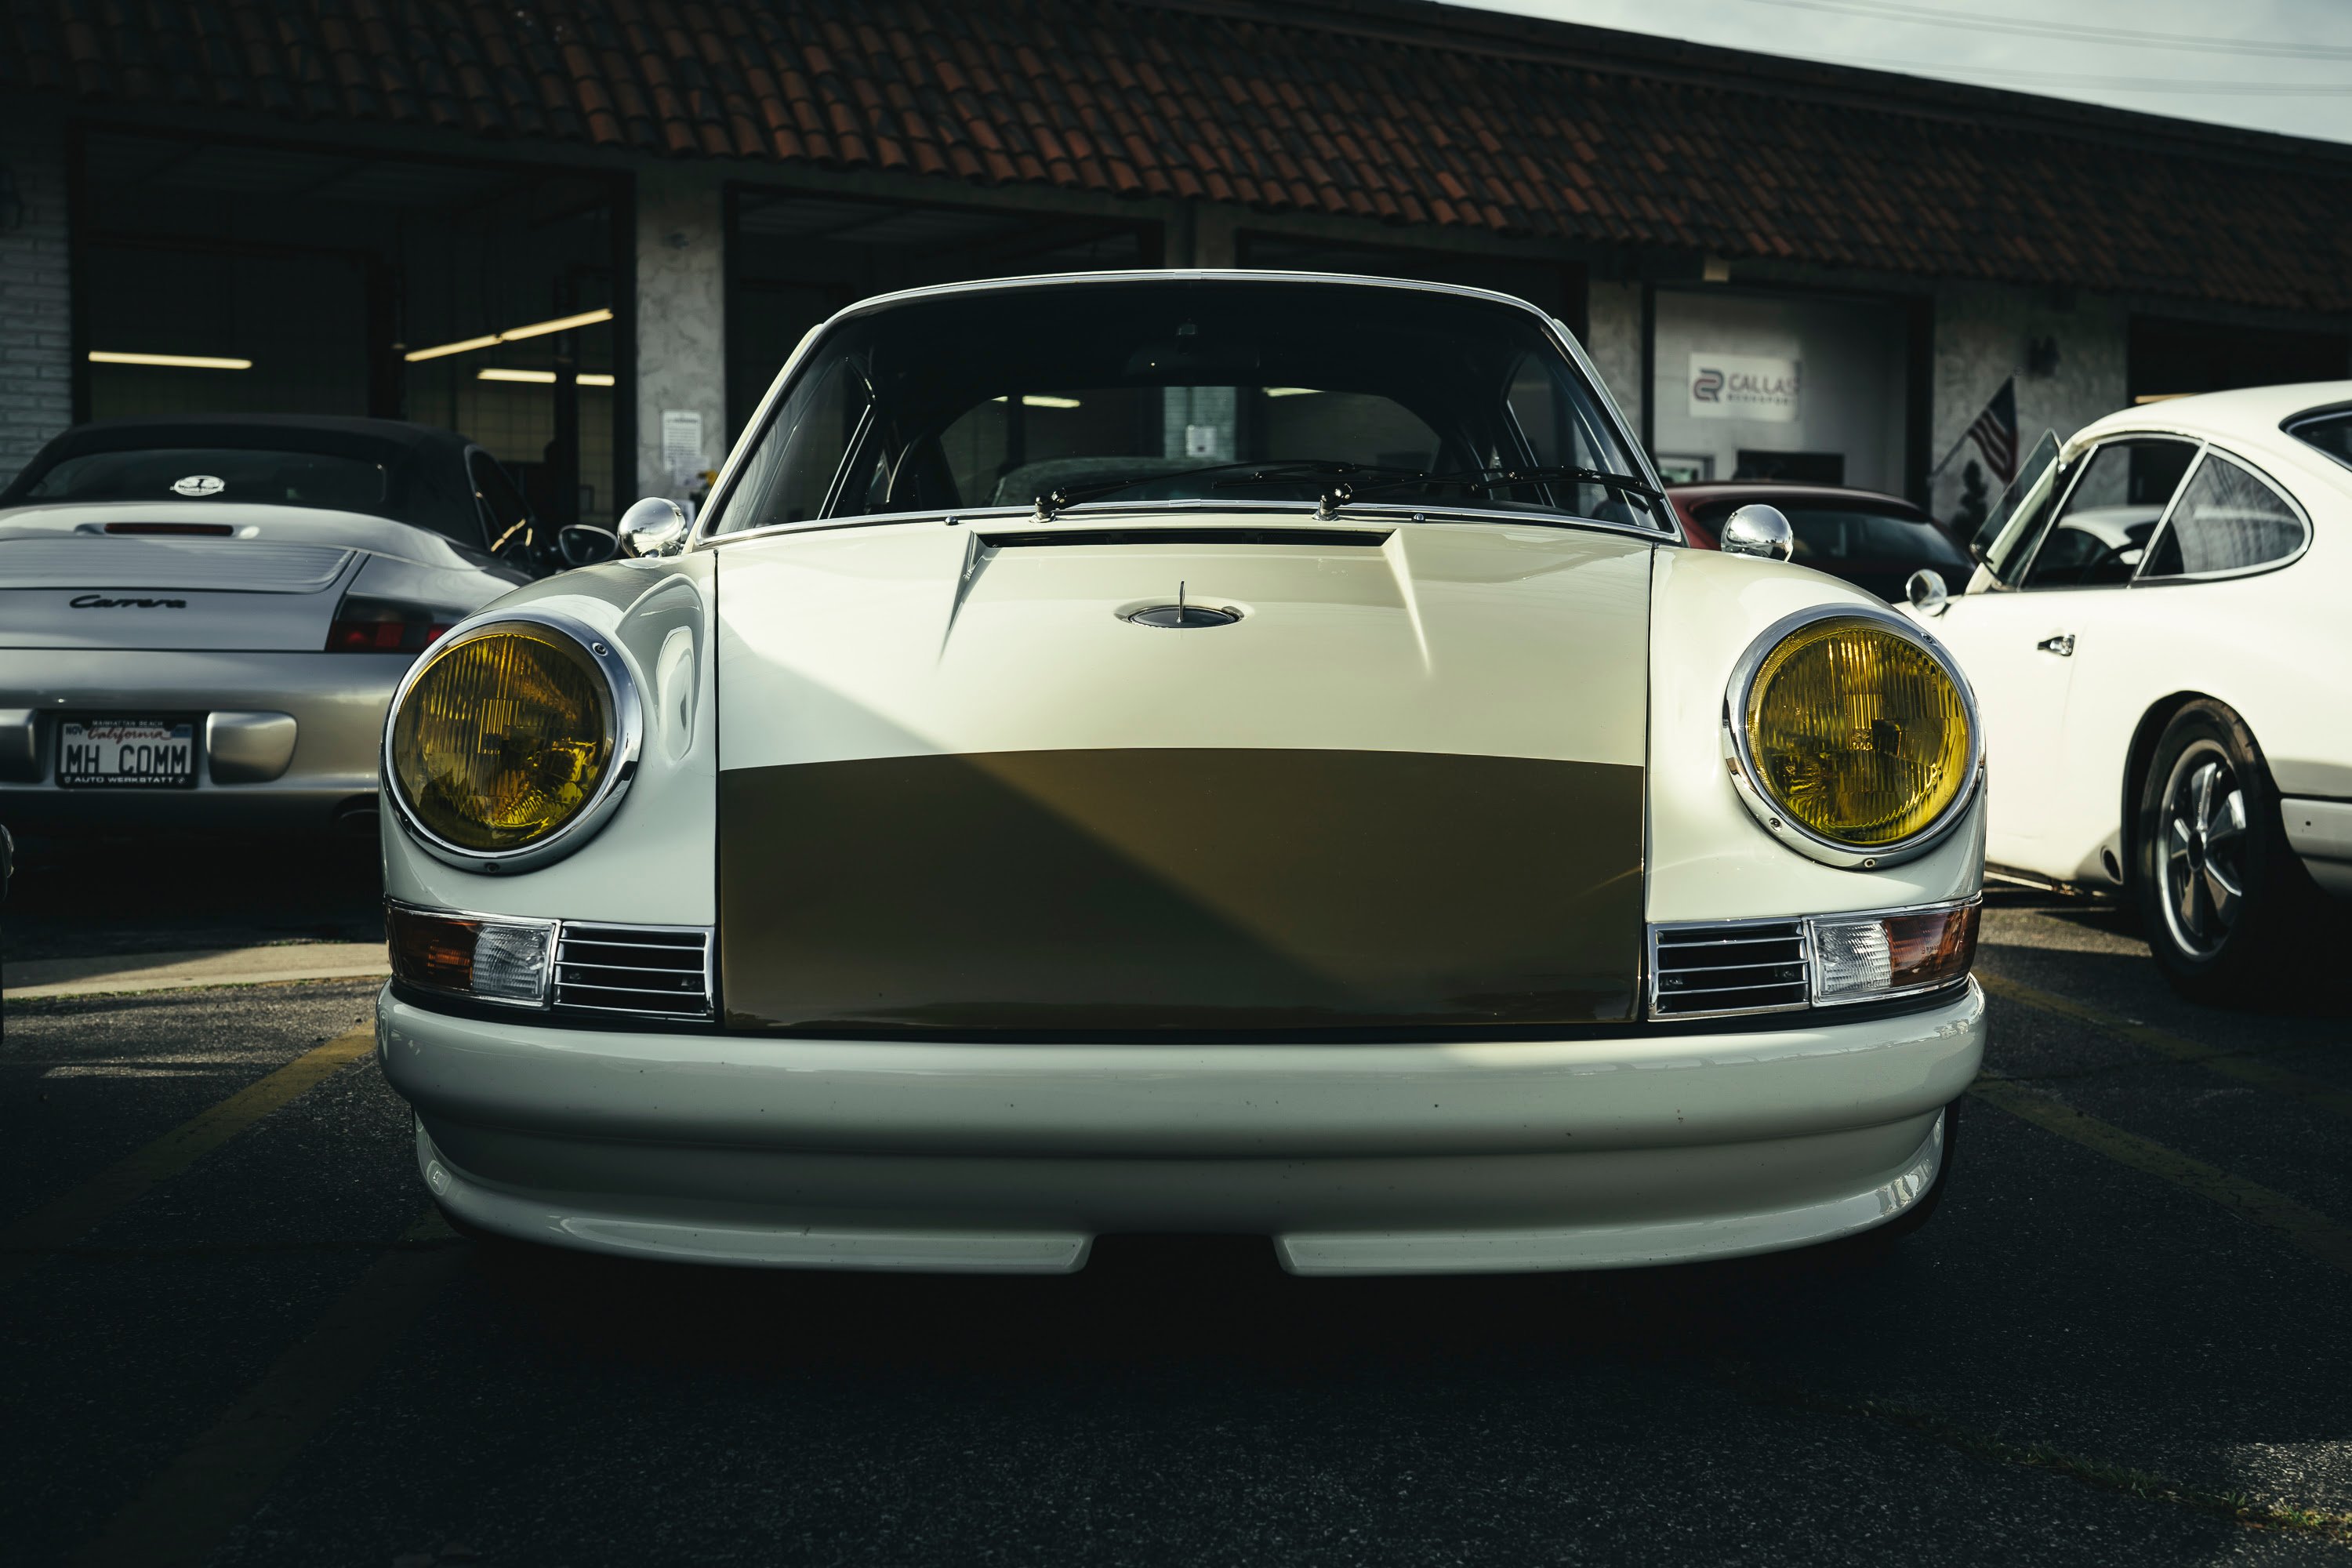 A cream and gold modfied 911 with yellow headlights at Callas Rennsport.